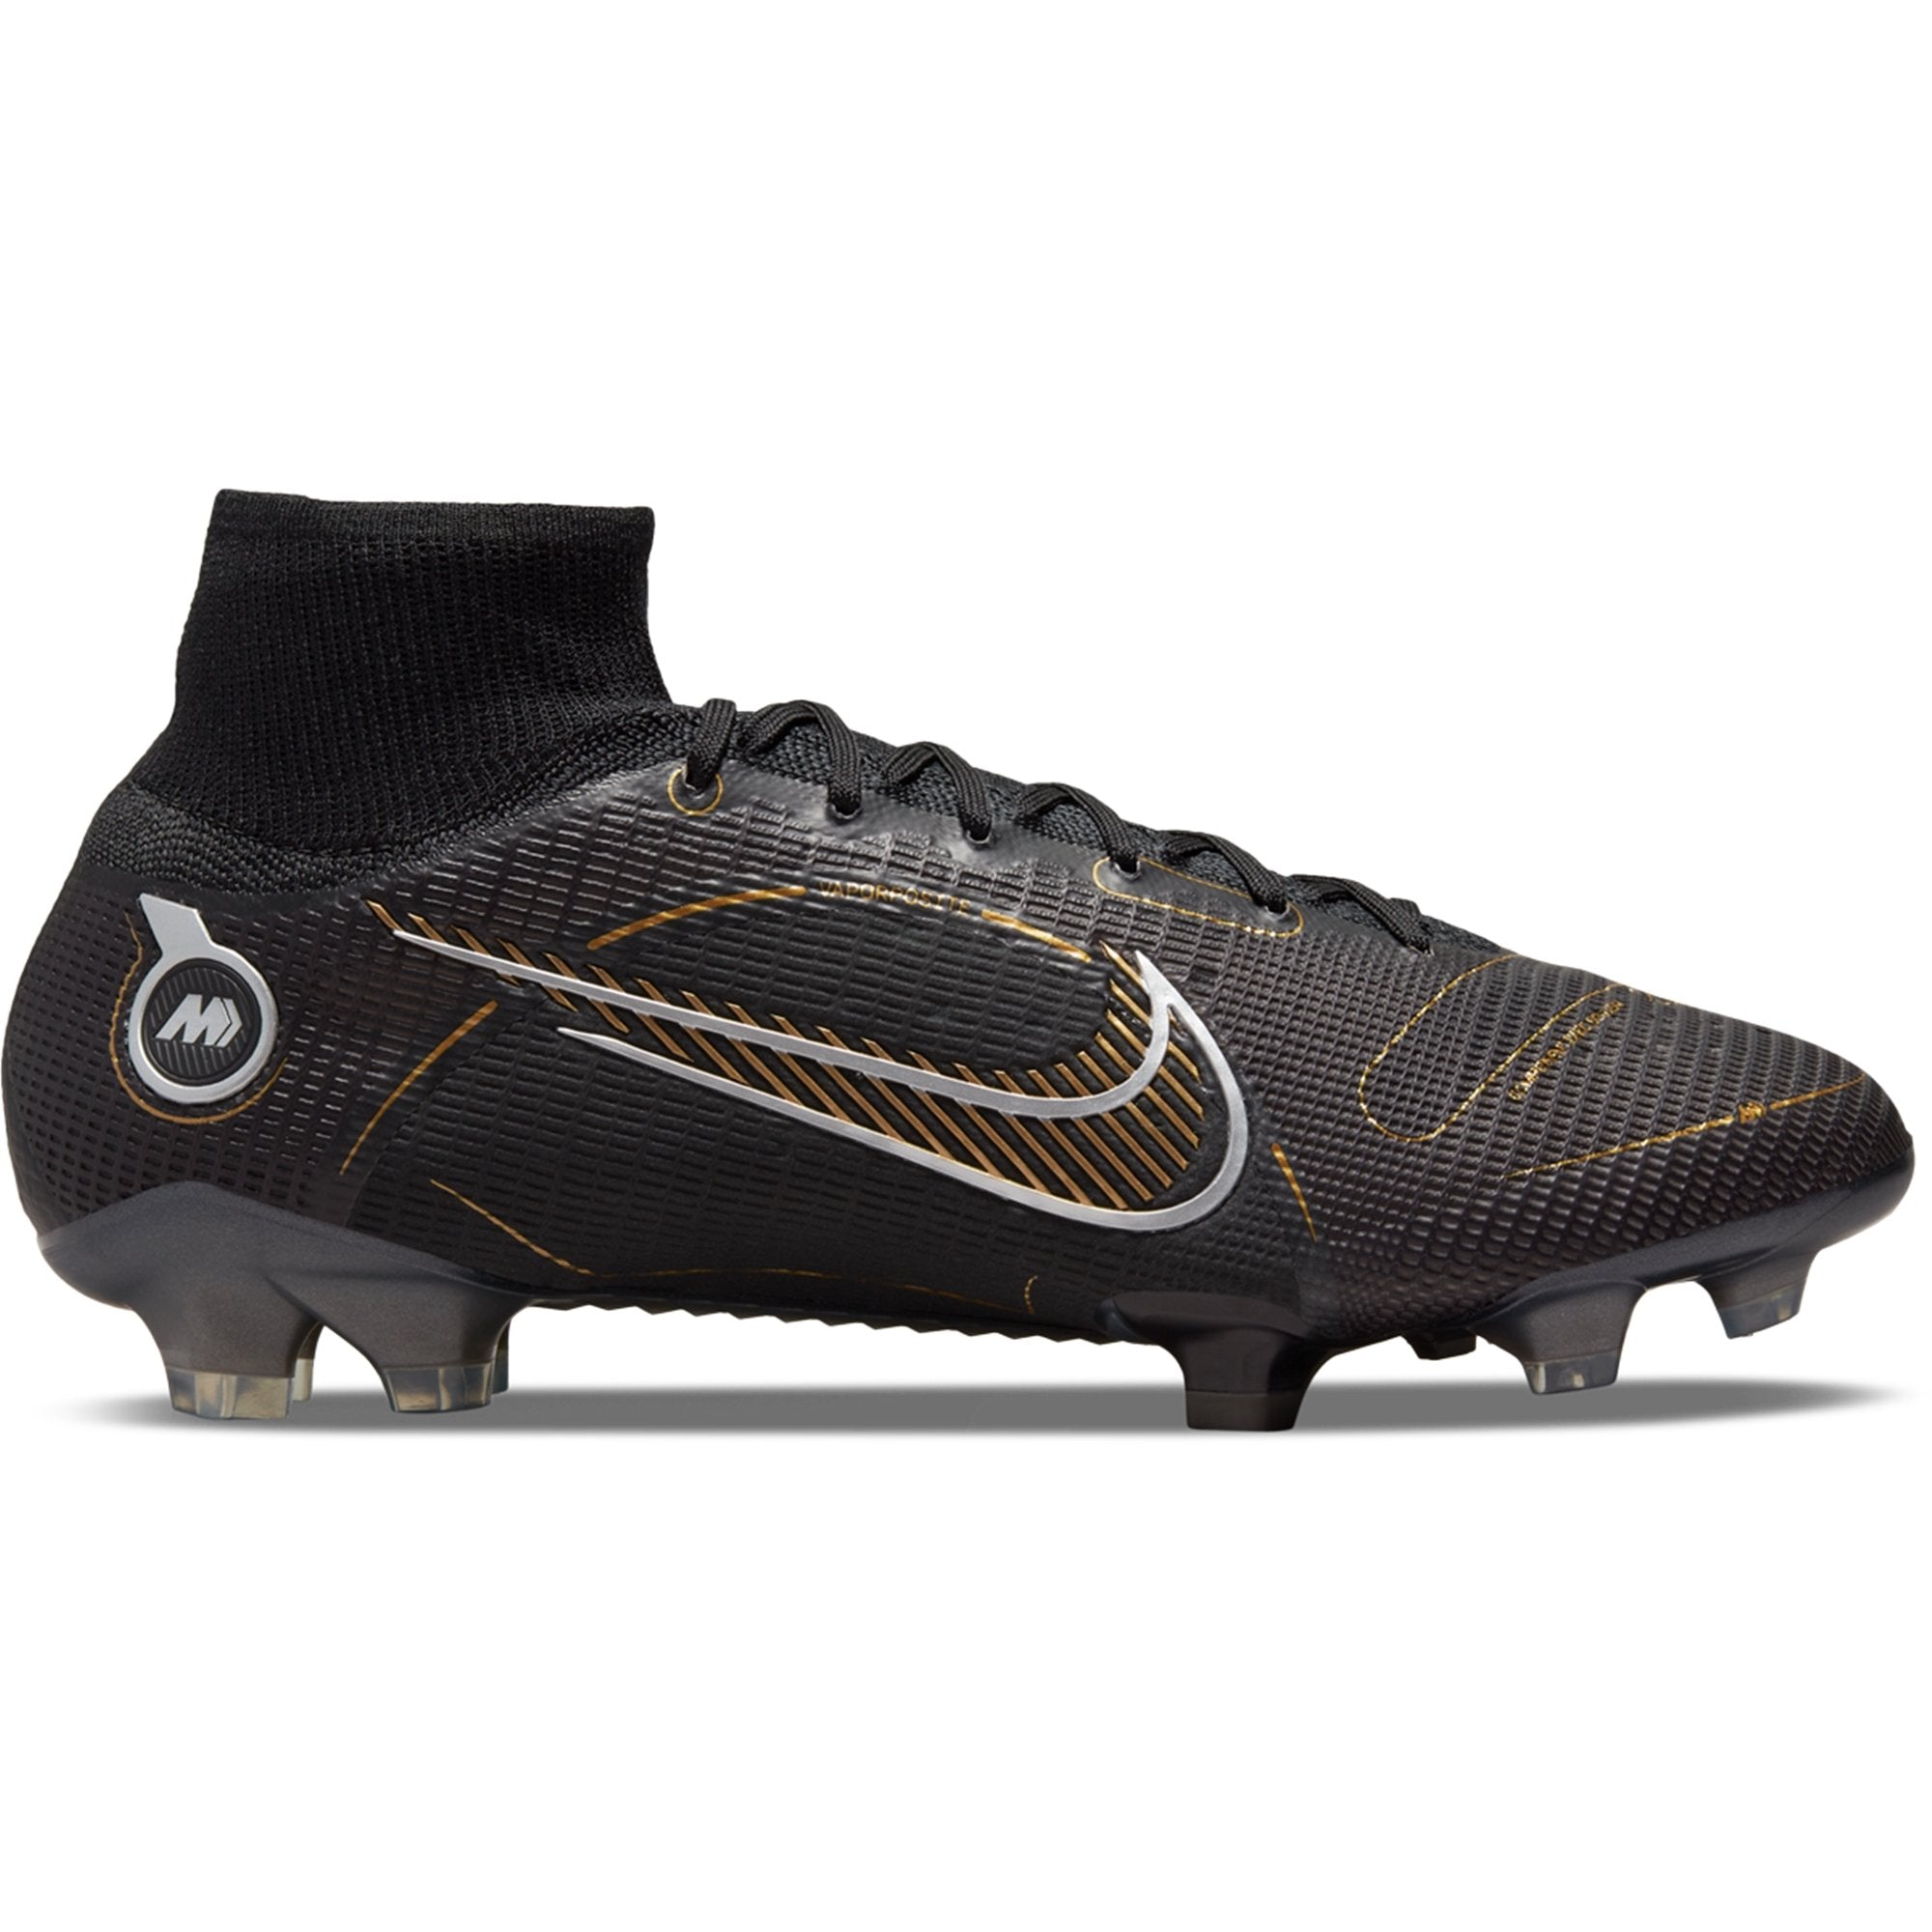 Nike Mercurial Superfly 8 Elite FG Firm Ground Soccer Cleat Black/Metallic Gold/Metallic Silver/Cave DJ2839-007 – Soccer Zone USA